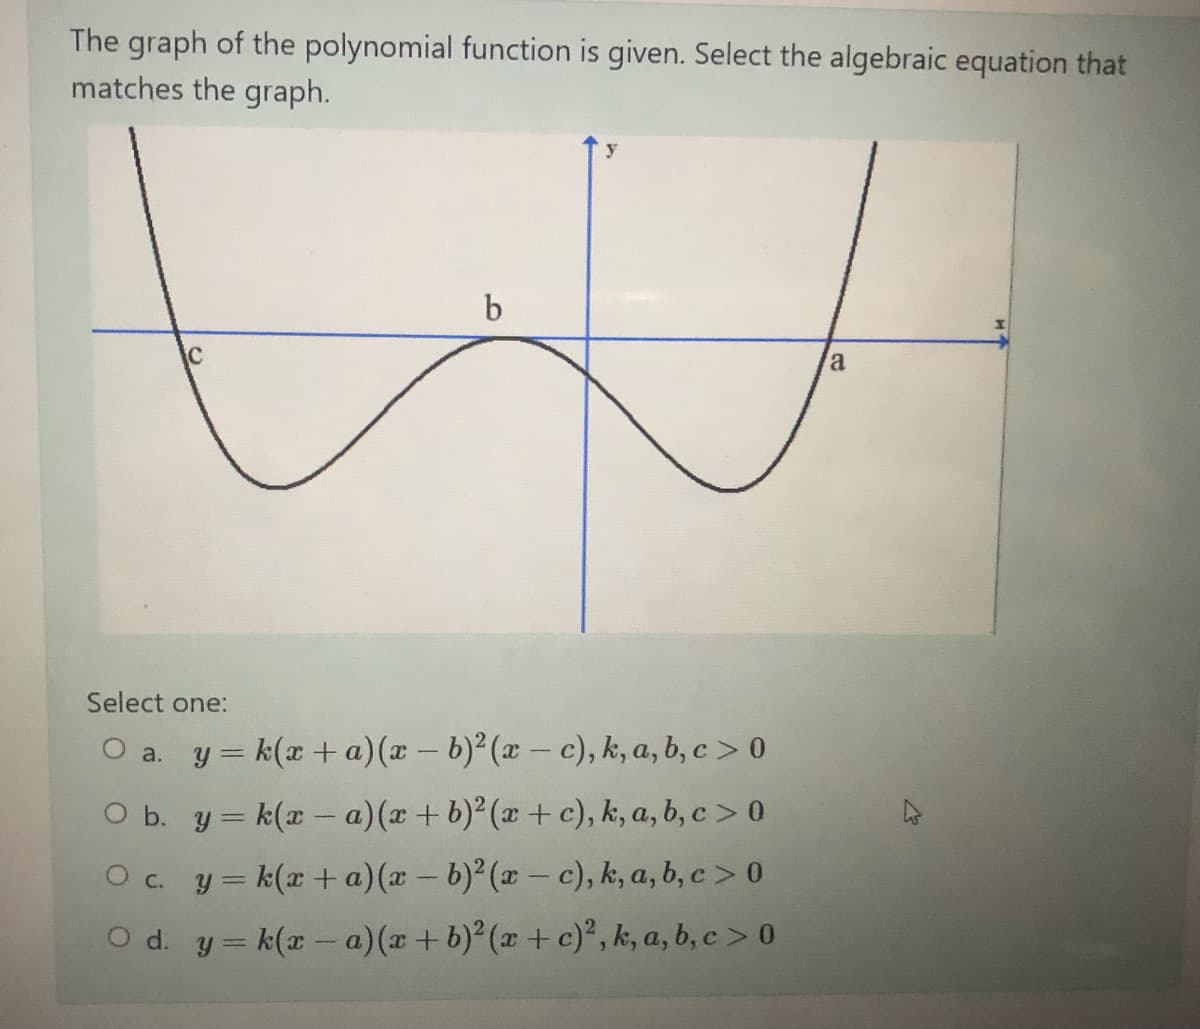 The graph of the polynomial function is given. Select the algebraic equation that
matches the graph.
y
C
a
Select one:
O a. y = k(x +a)(x - b) (x- c), k, a, b, c > 0
O b. y = k(x - a)(x + b)² (x + c), k, a, b, c > 0
O c. y= k(x+ a)(x - b)² (x- c), k, a, b, c > 0
O d. y= k(x- a)(x +b) (x +c)°, k, a, b, c > 0
|
